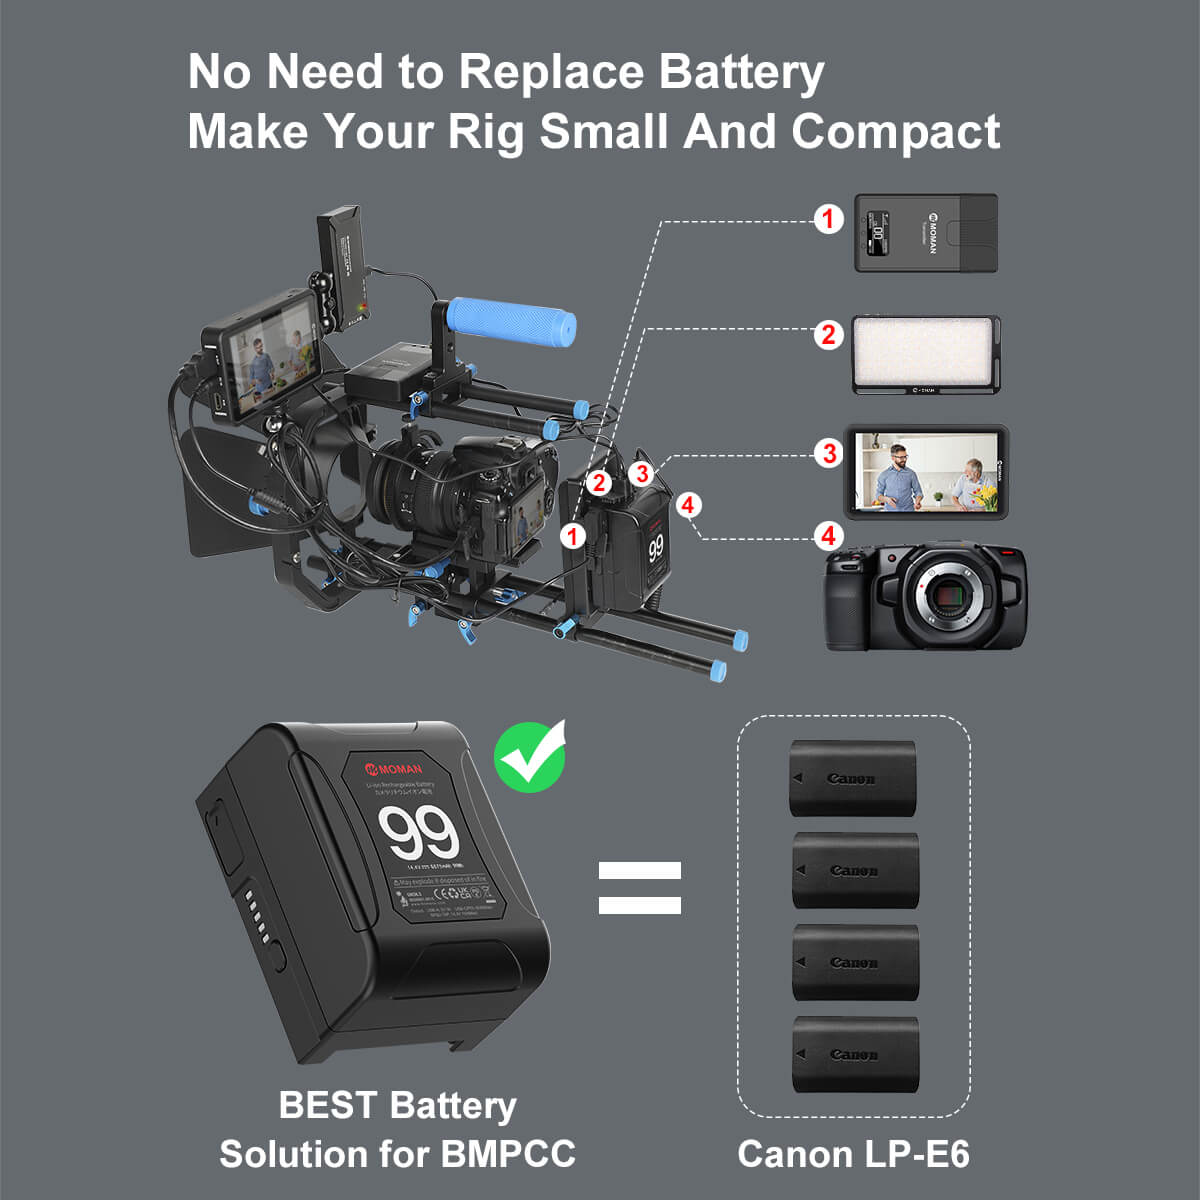 Moman Power 99\ v-lock battery with Dtap is equal to four pieces of Canon LP-E6. It can make your rig smaller and more compact.